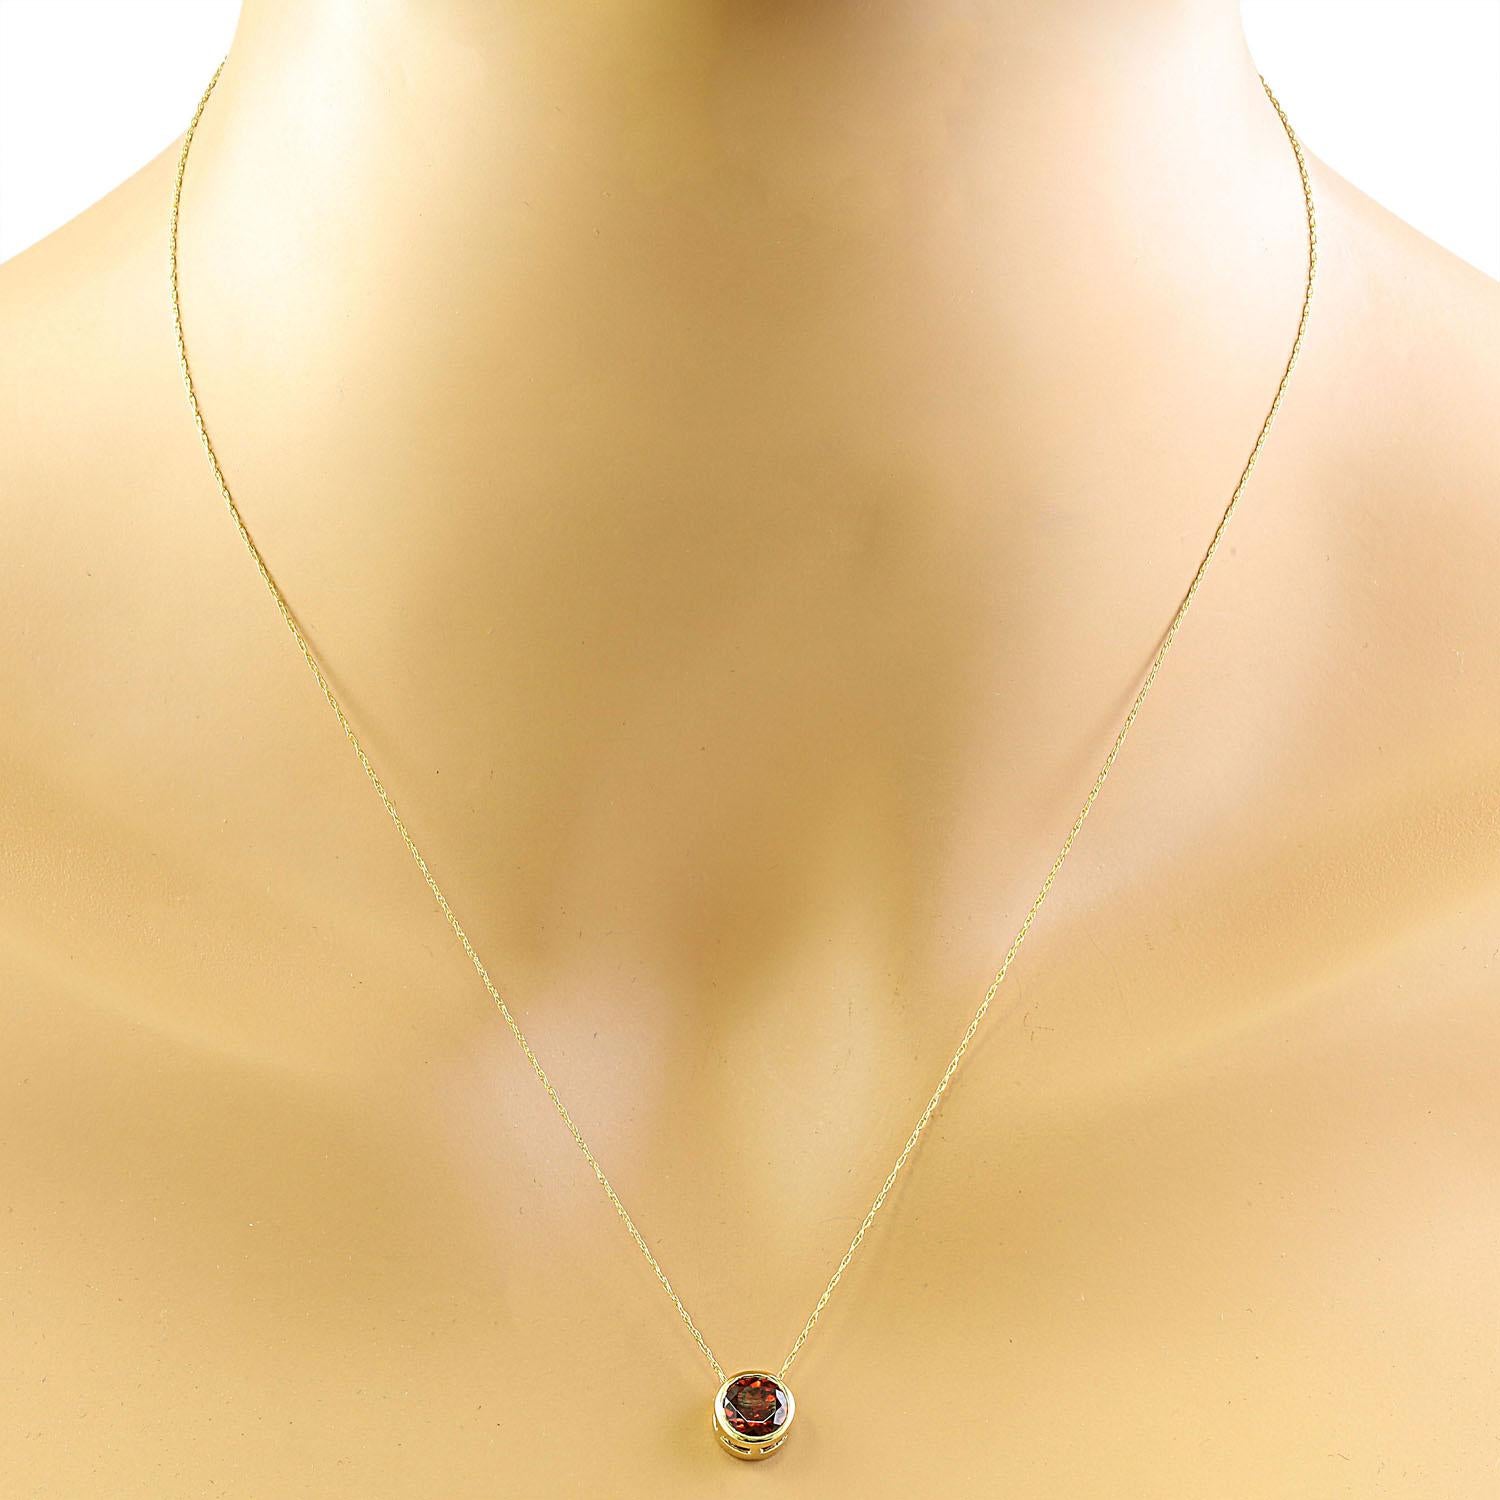 1.50 Carat Garnet 14K Yellow Gold Necklace
Stamped: 14K
Total Necklace Weight: 1.4 Grams
Length: 16 Inches
Garnet Weight: 1.50 Carat (6.50x6.50 Millimeters) 
Face Measures: 8.20x8.20 Millimeters 
SKU: [600196]